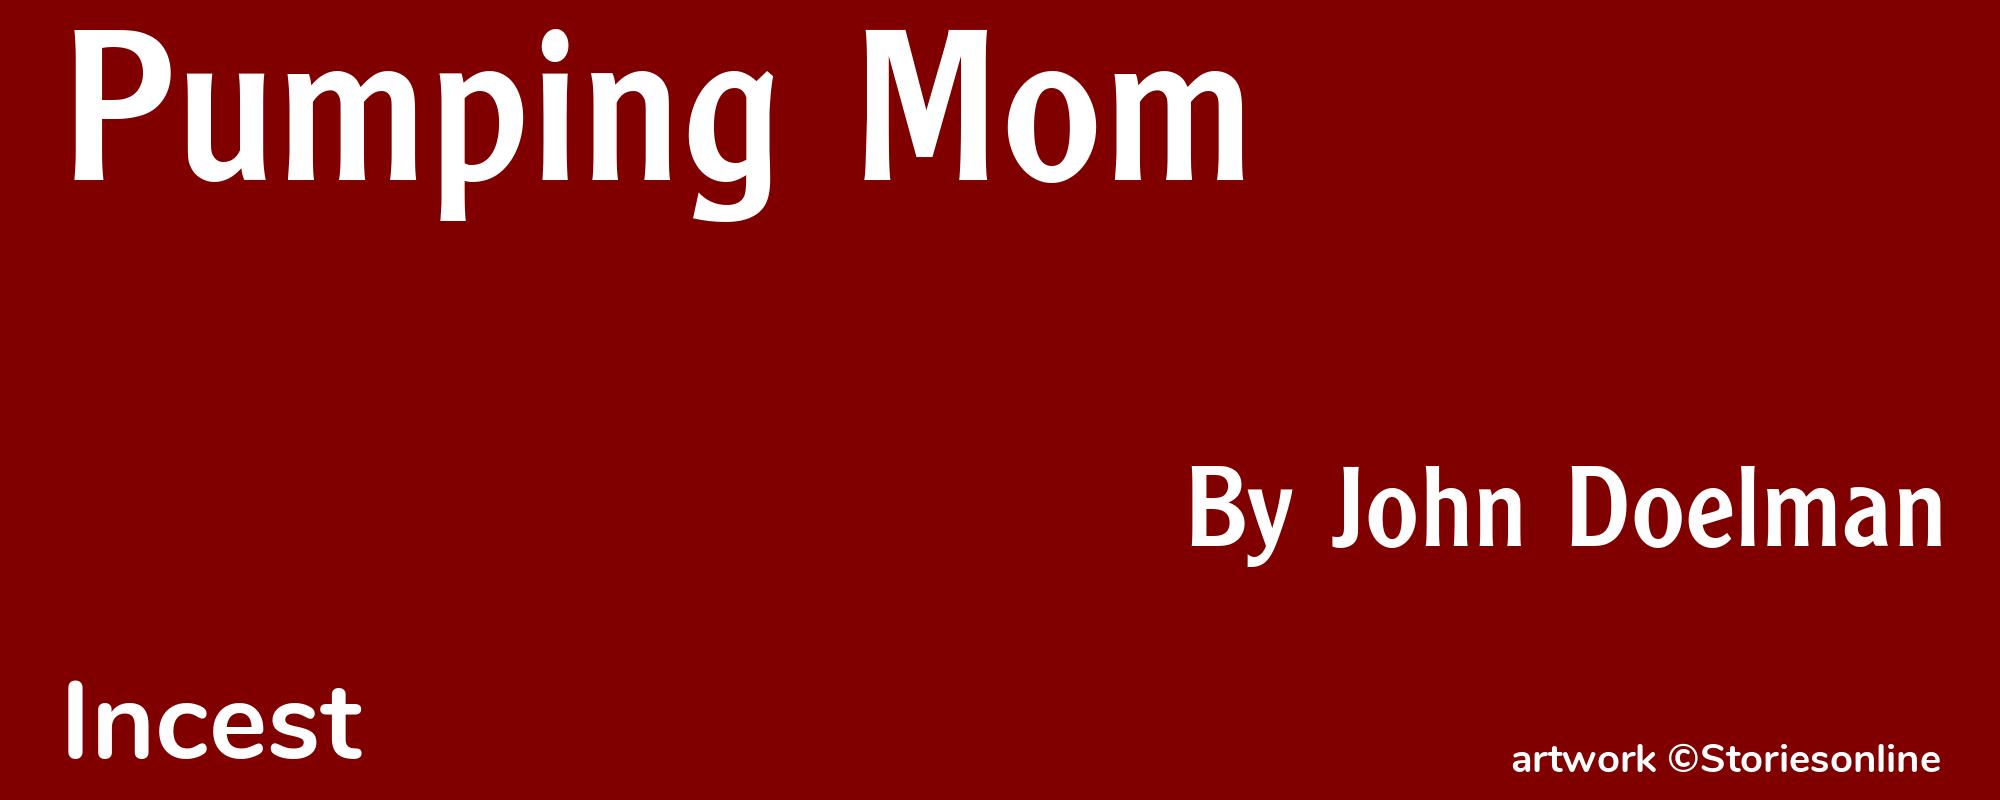 Pumping Mom - Cover